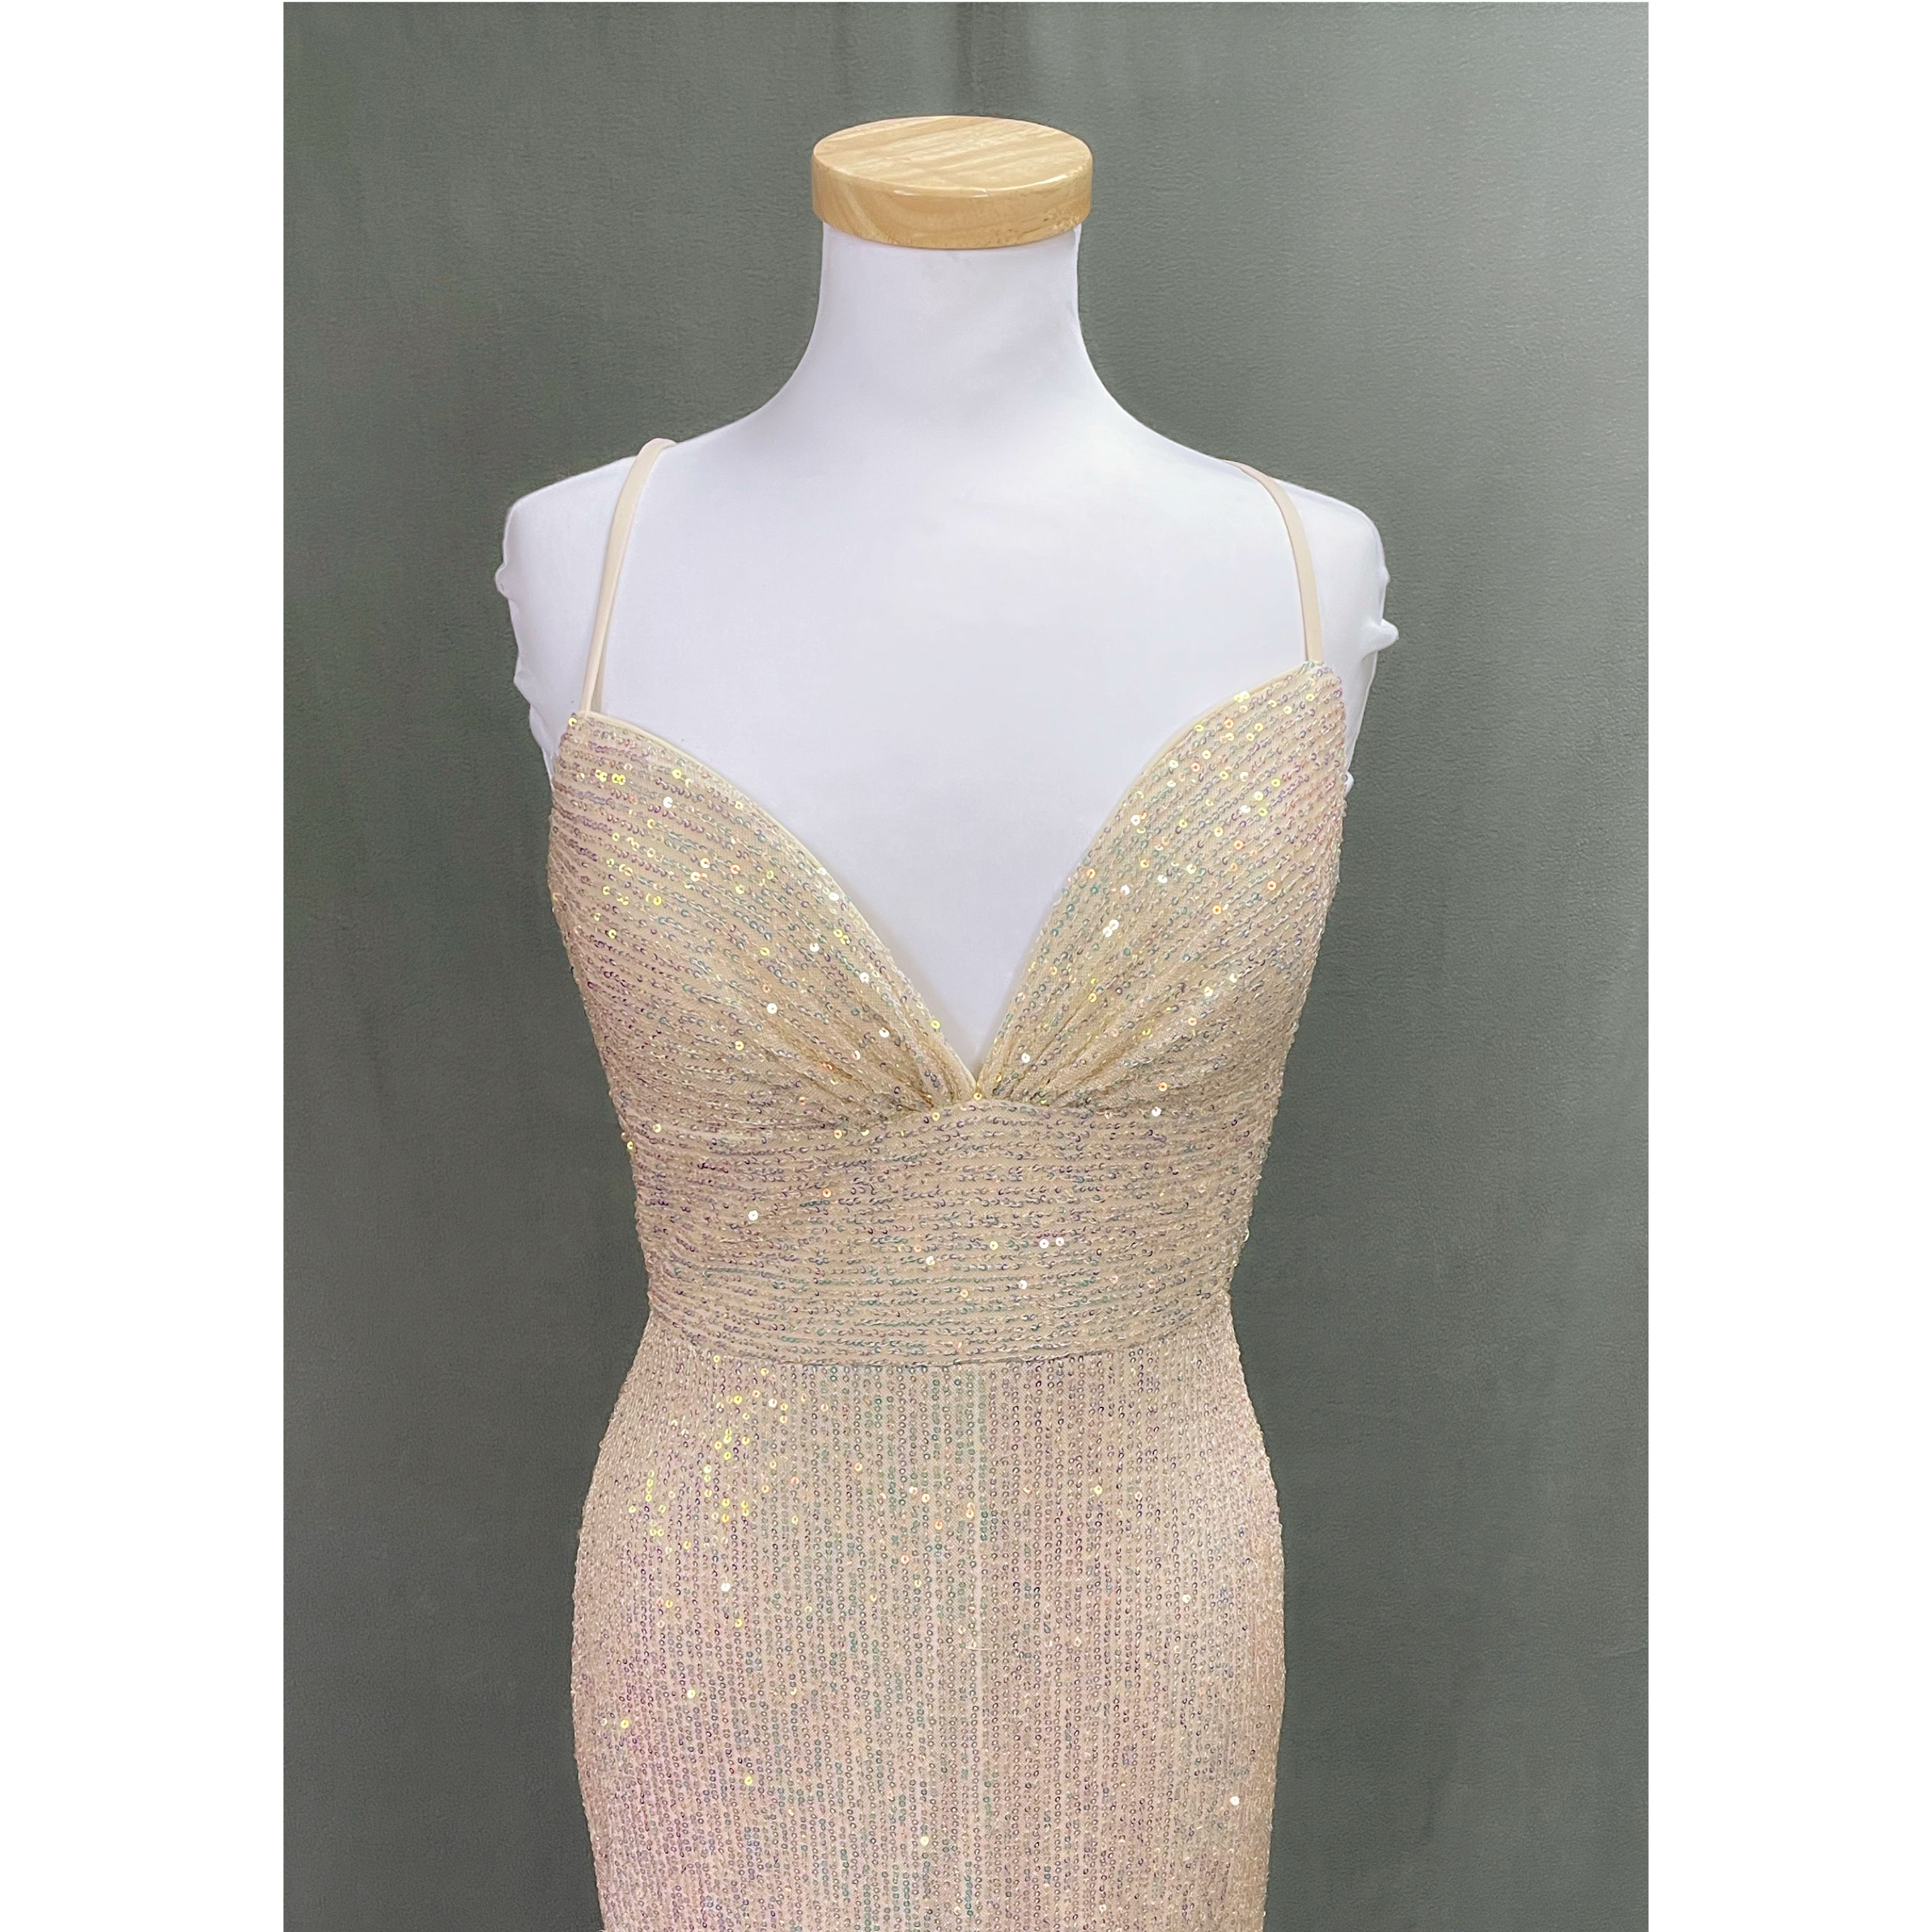 The Secret Dress champagne sequin dress, sizes 4 & 10, BRAND NEW WITH TAGS!